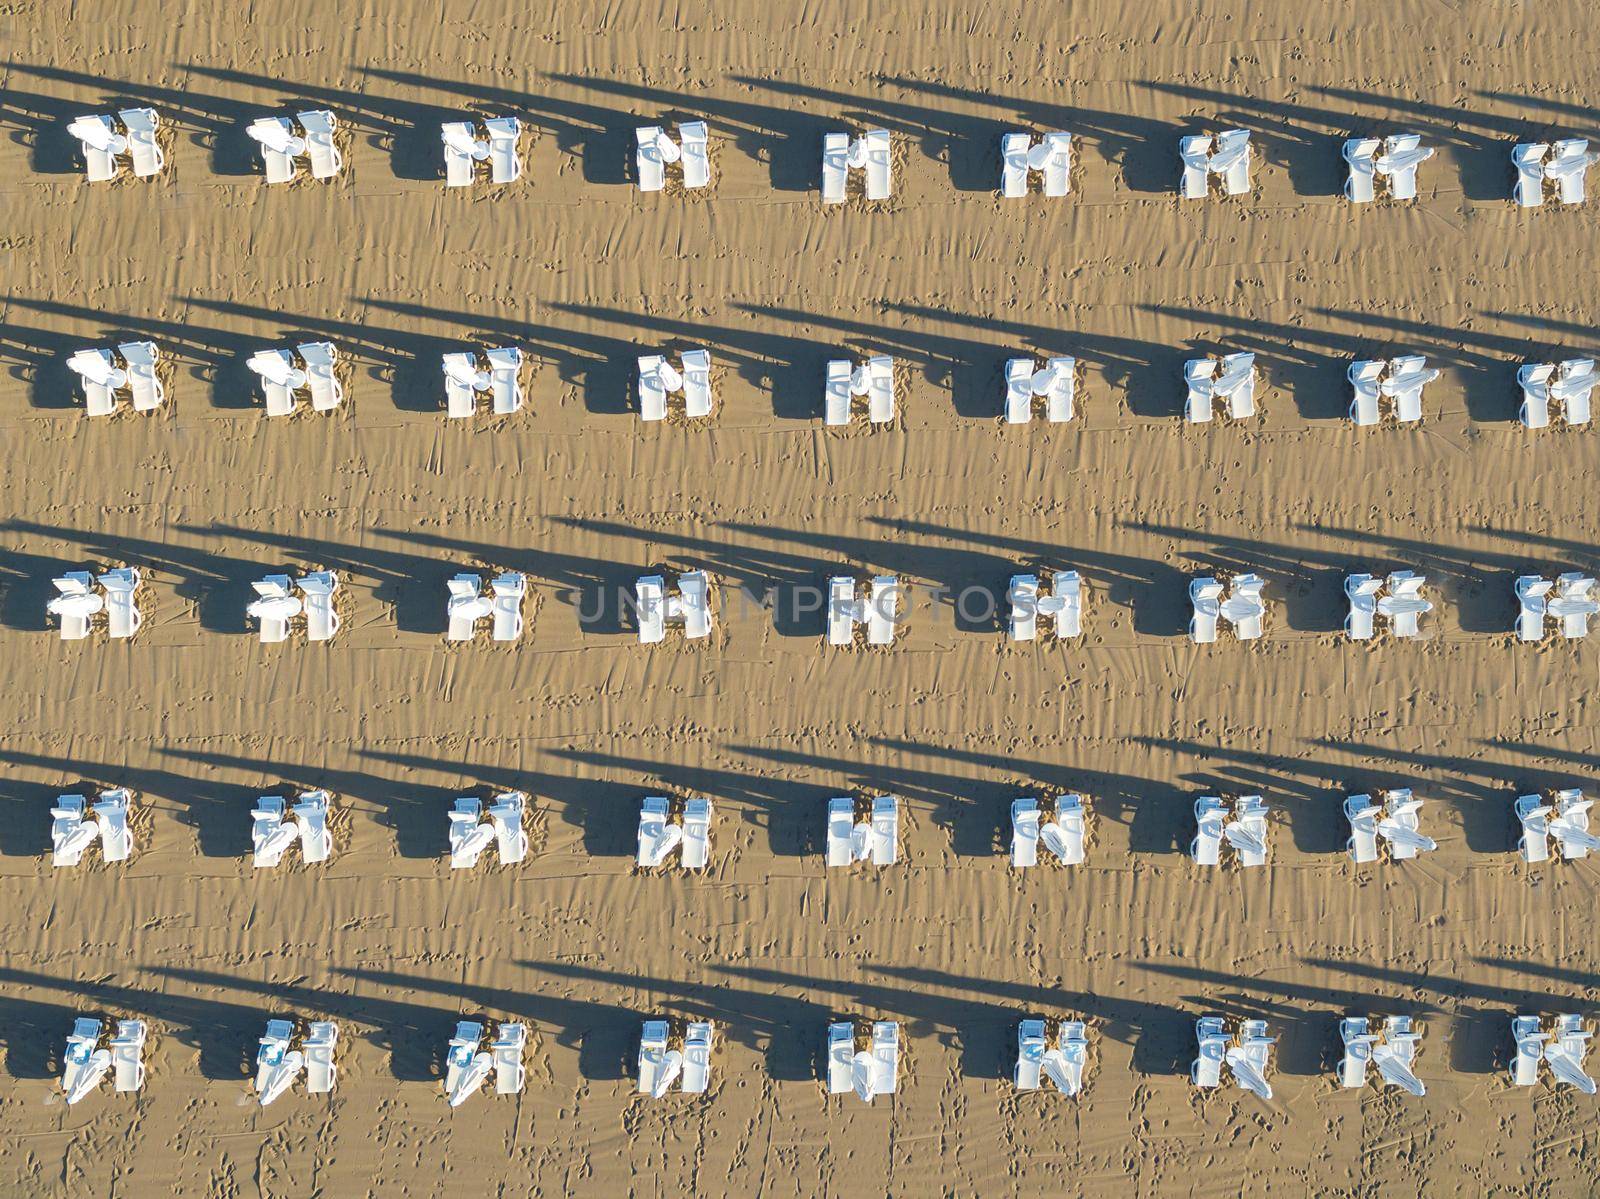 Sunbeds and umbrellas lined up on the beach at sunrise by Sonat